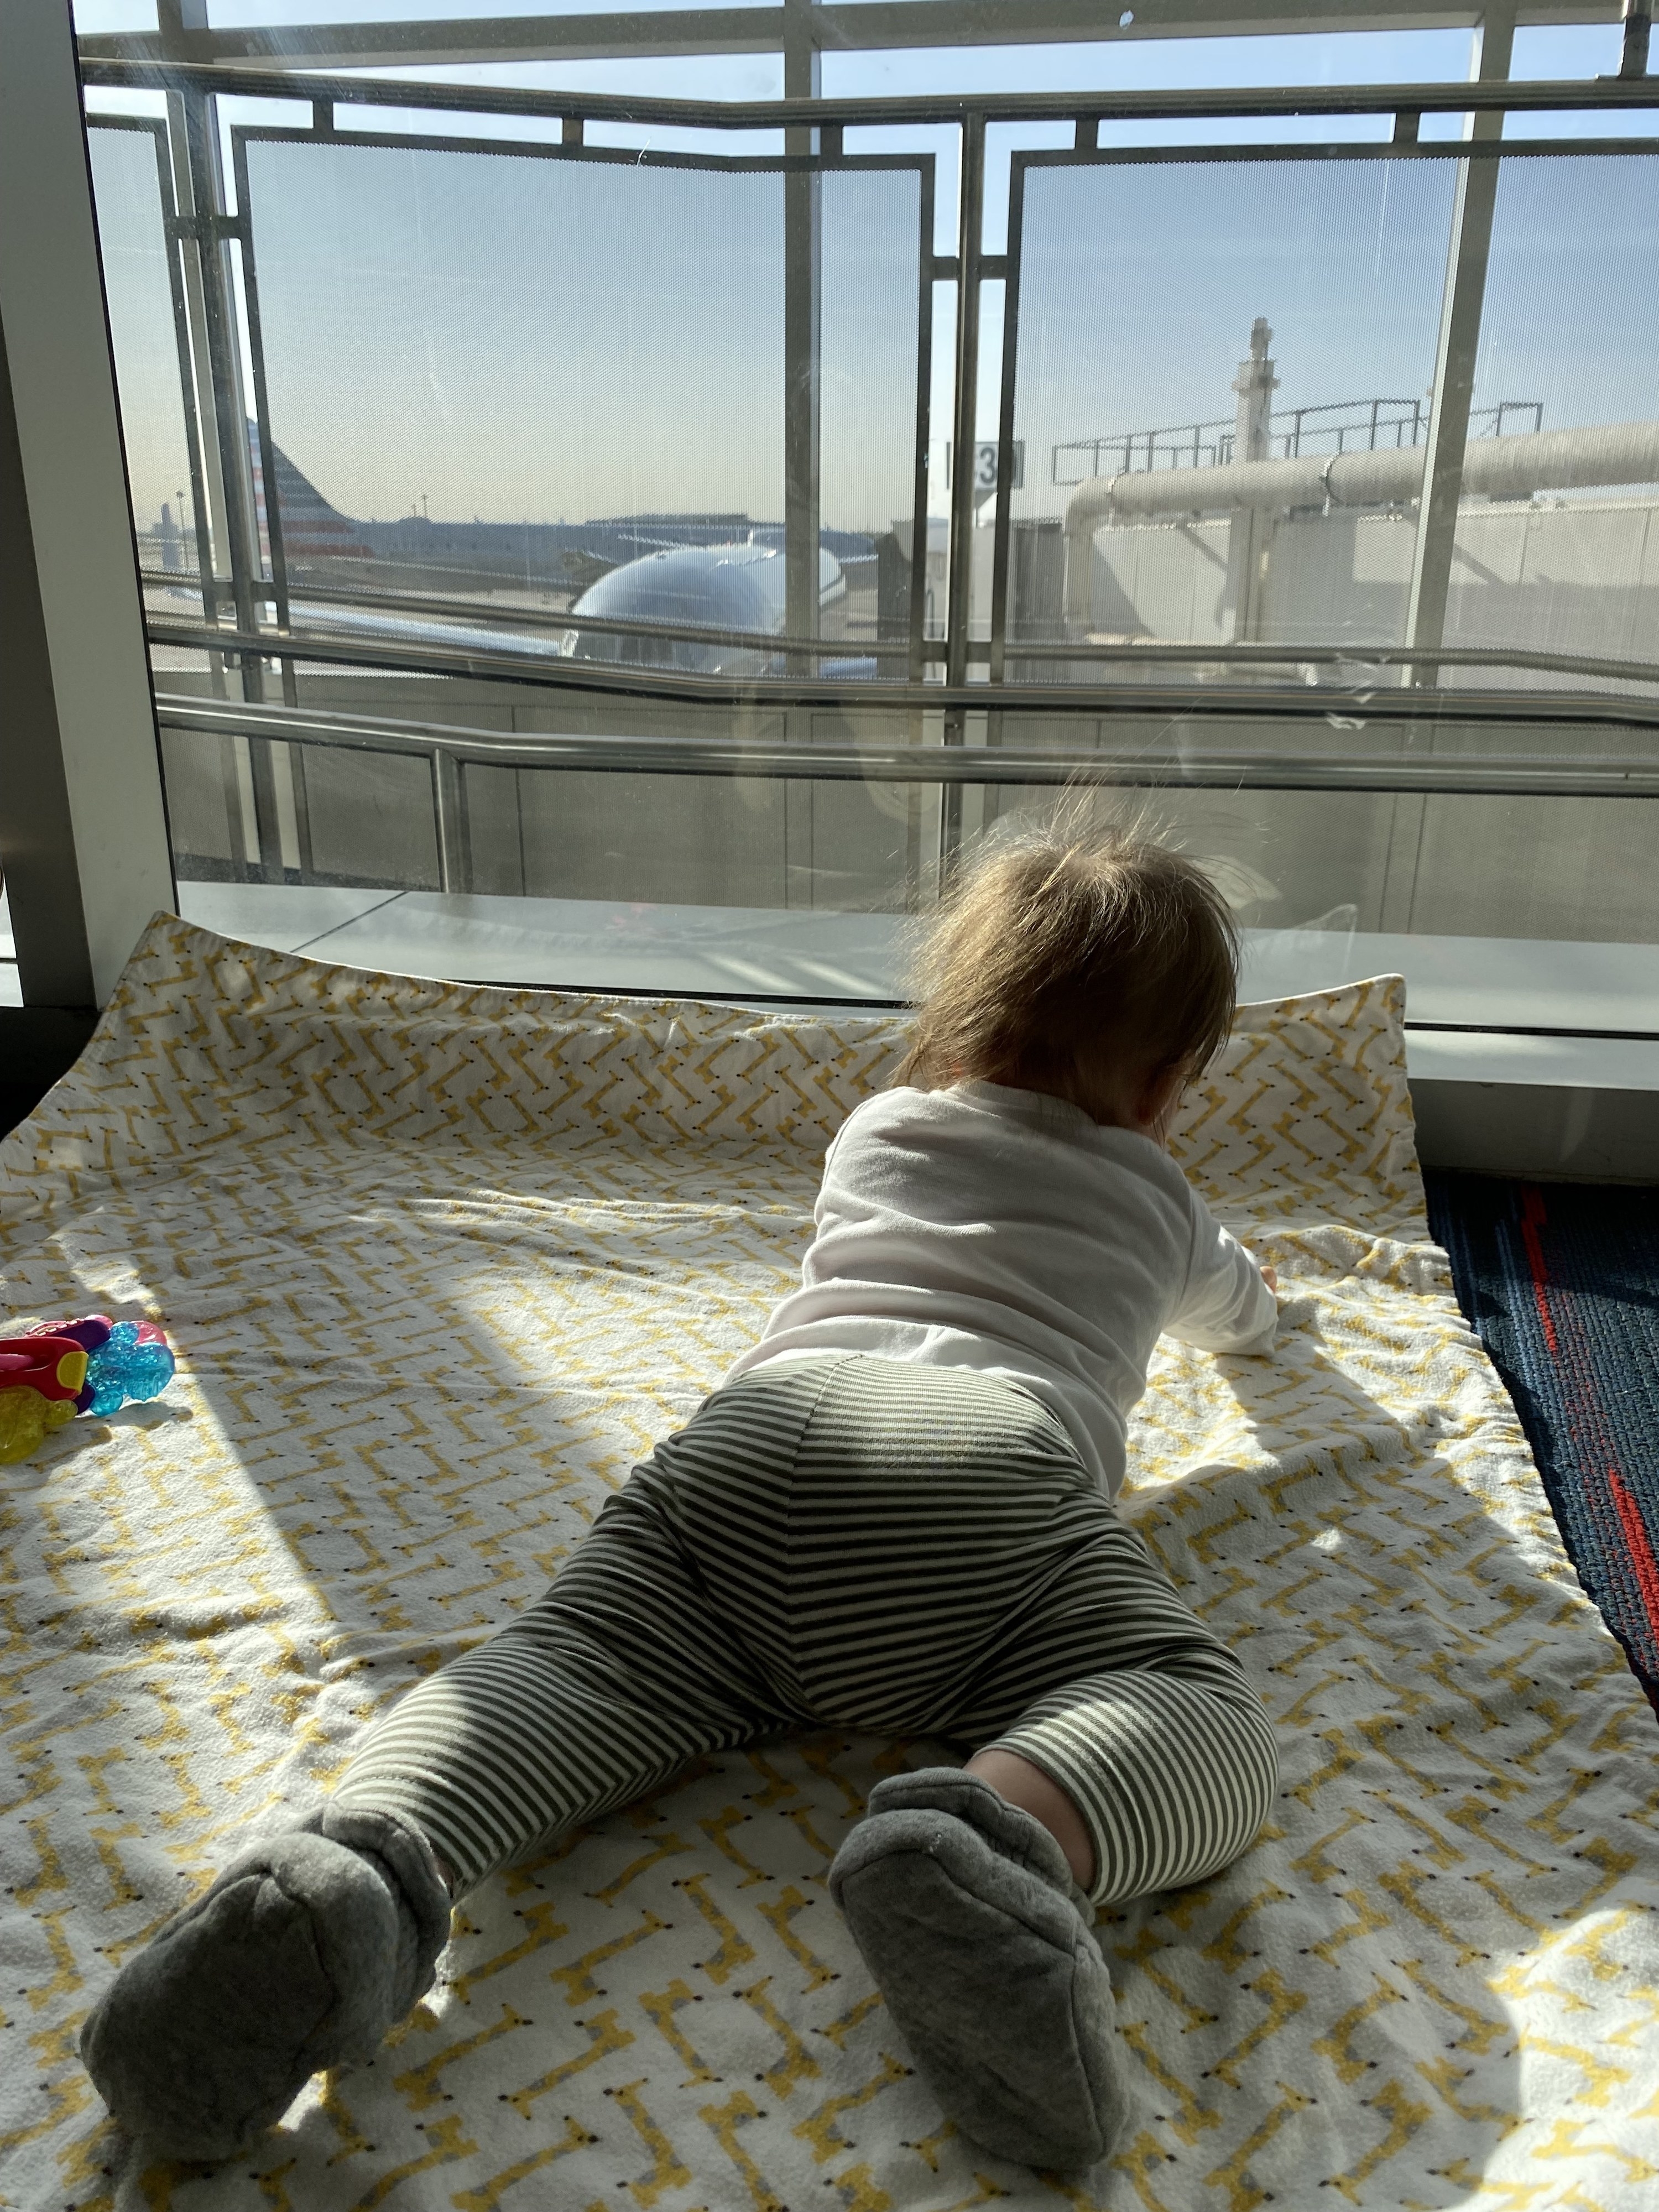 Baby on a blanket at the airport